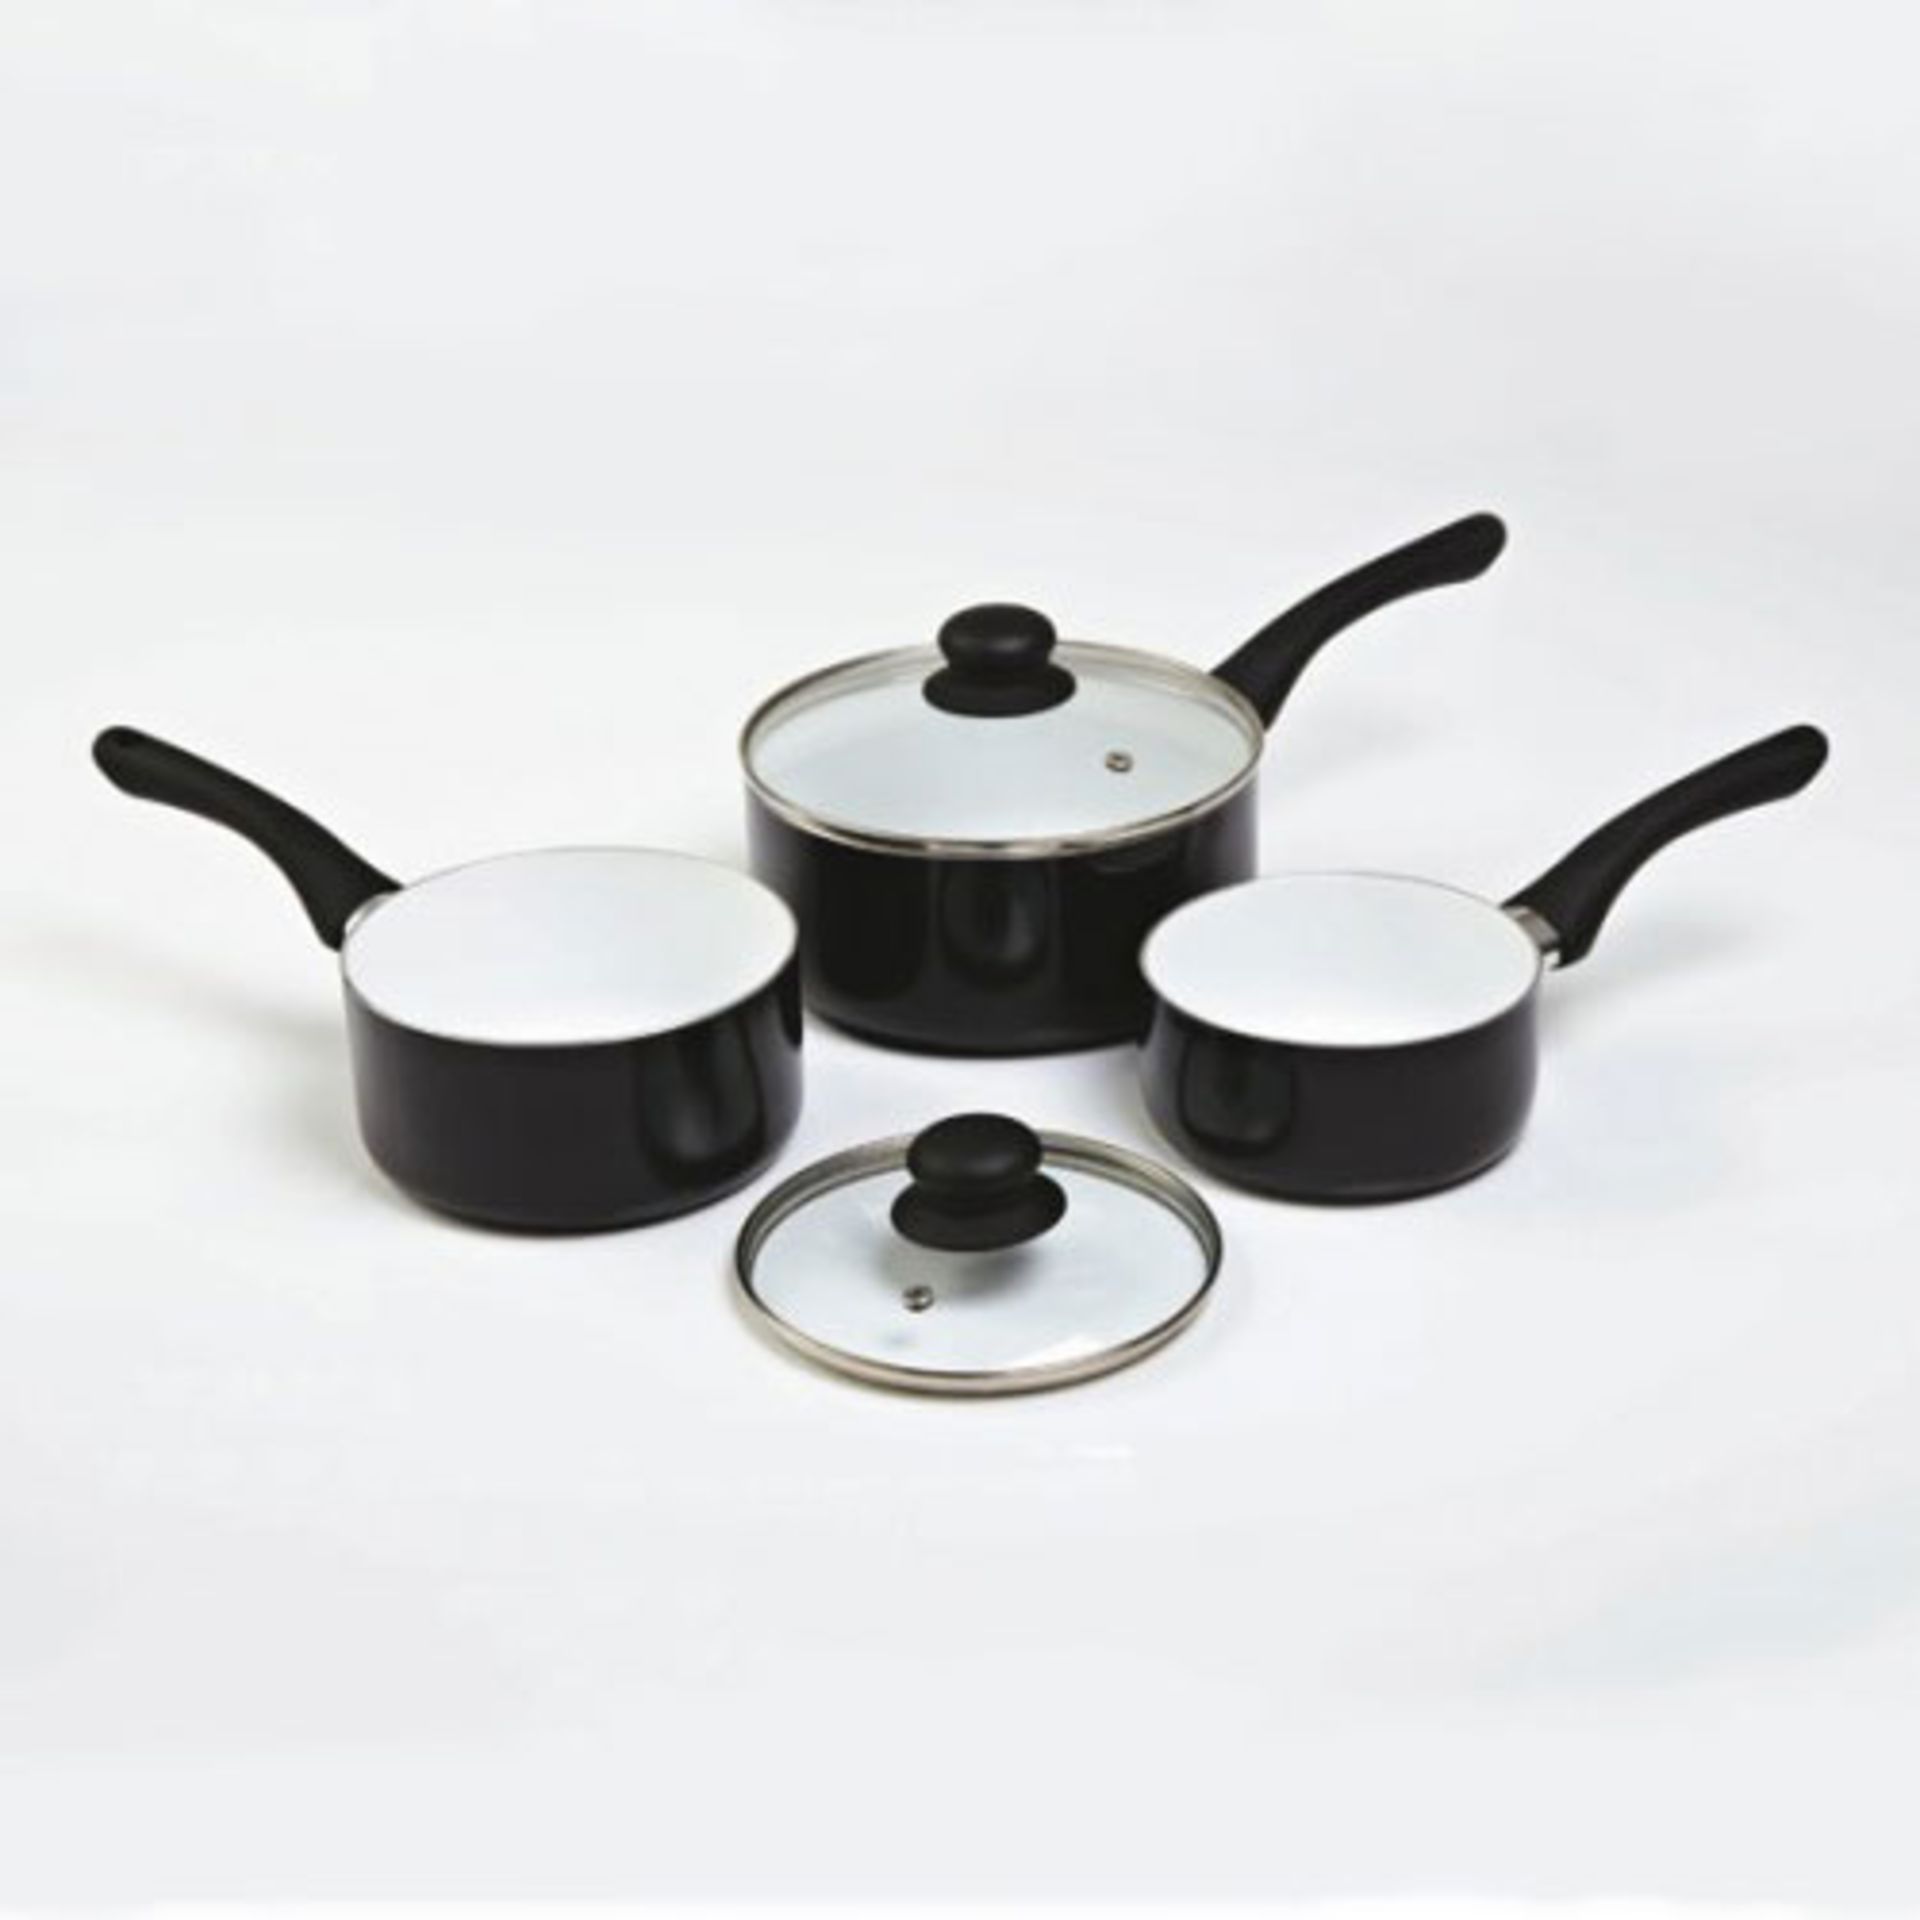 V Brand New Five Piece Cermalon Non Stick Ceramic Coating Green Sauce Pan Set With Glass Lids X 2